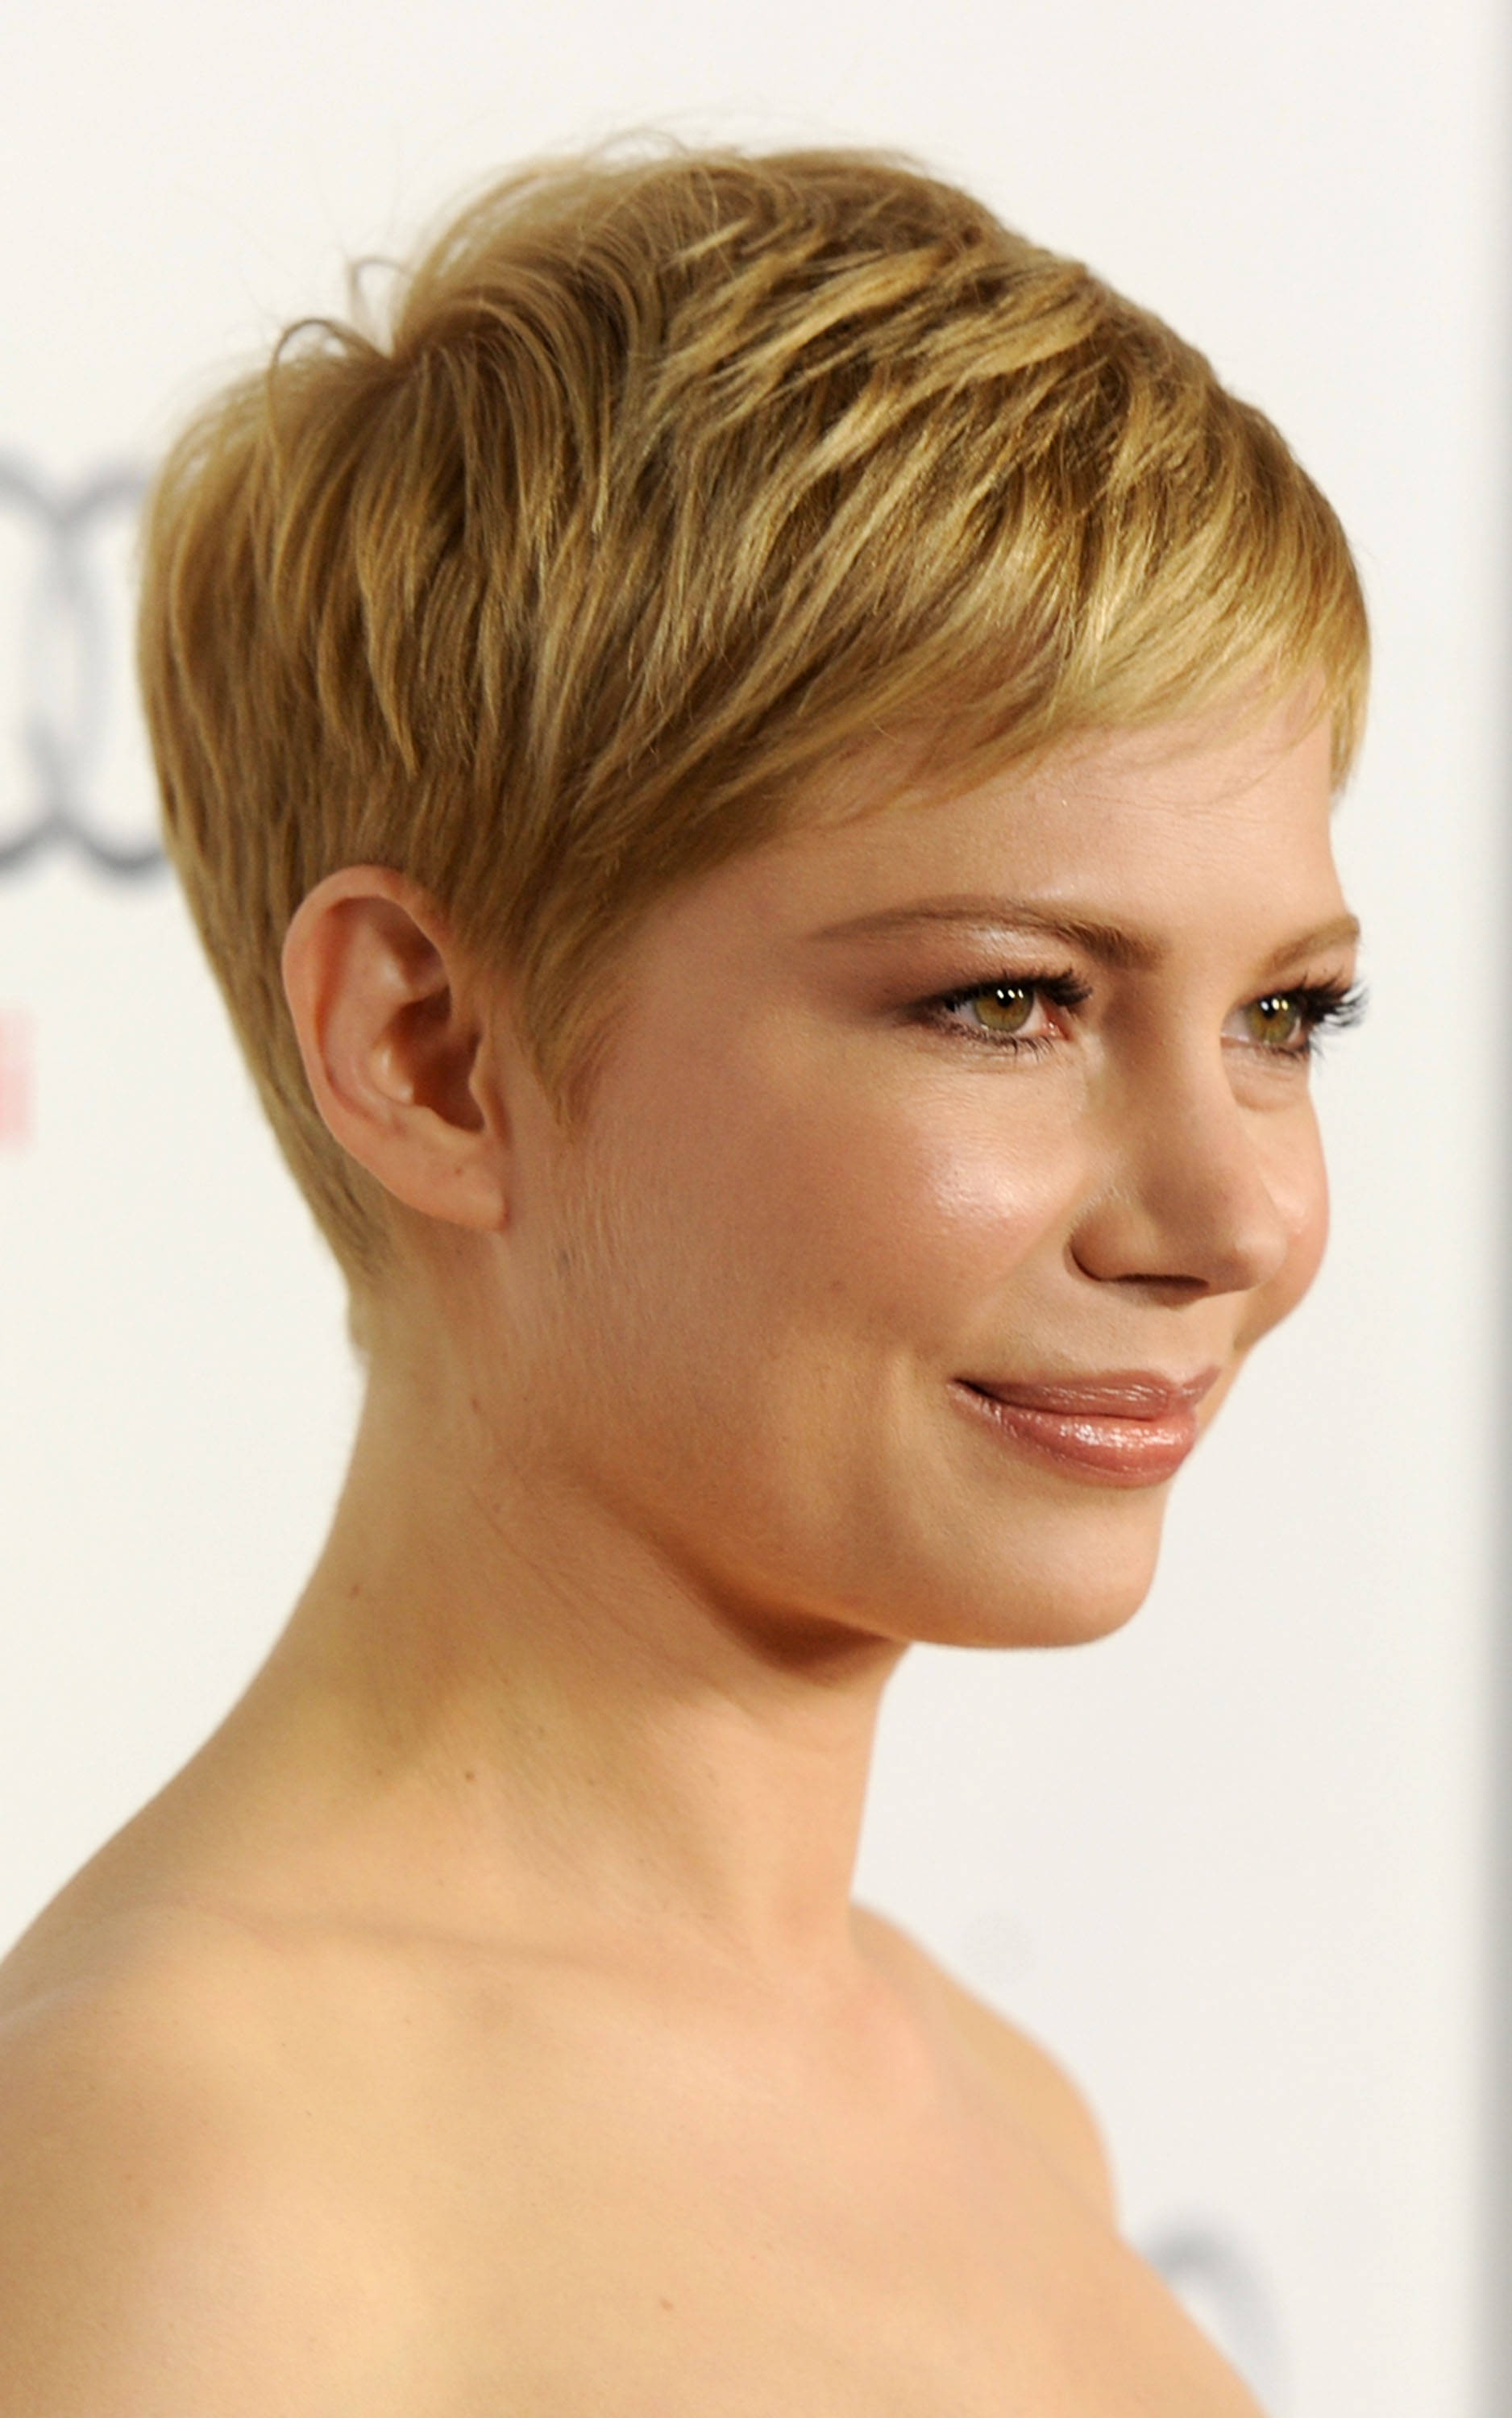 HOLLYWOOD, CA - NOVEMBER 06:  Actress Michelle Williams arrives at the "My Week With Marilyn" special screening during AFI FEST 2011 presented by Audi at Grauman's Chinese Theatre on November 6, 2011 in Hollywood, California.  (Photo by Kevin Winter/Getty Images for AFI)